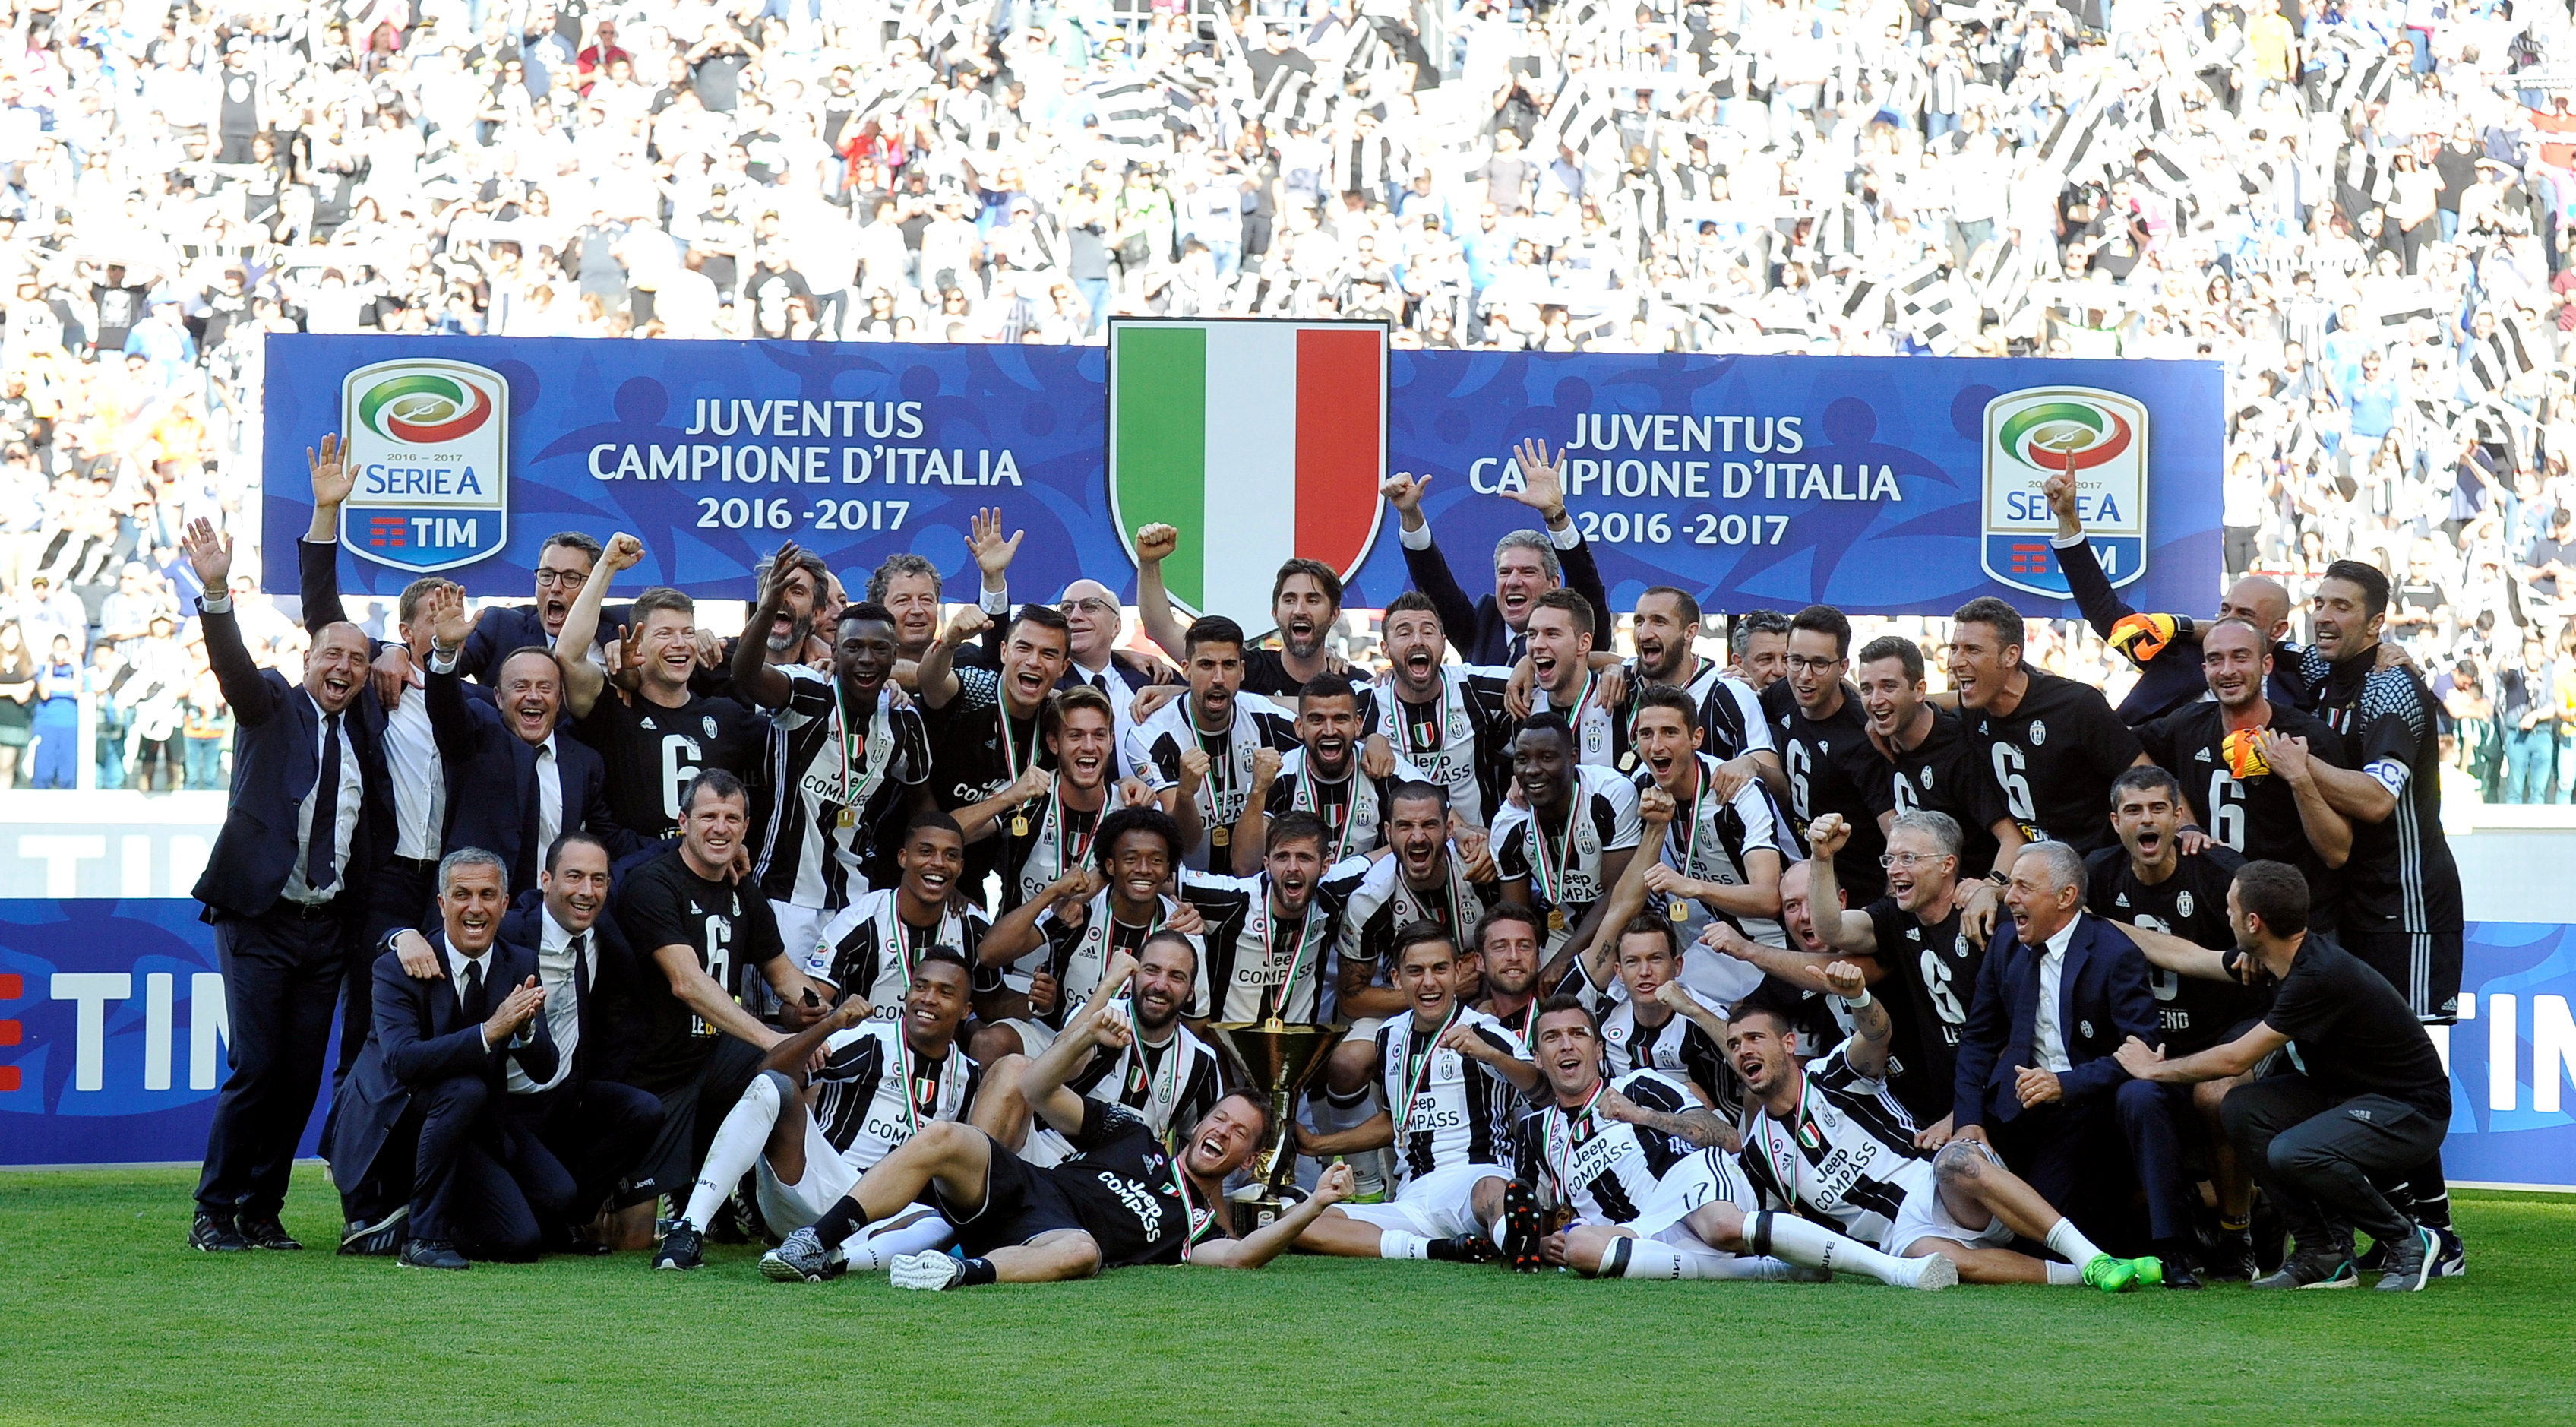 Football: Juventus clinch sixth successive Serie A title with Crotone win